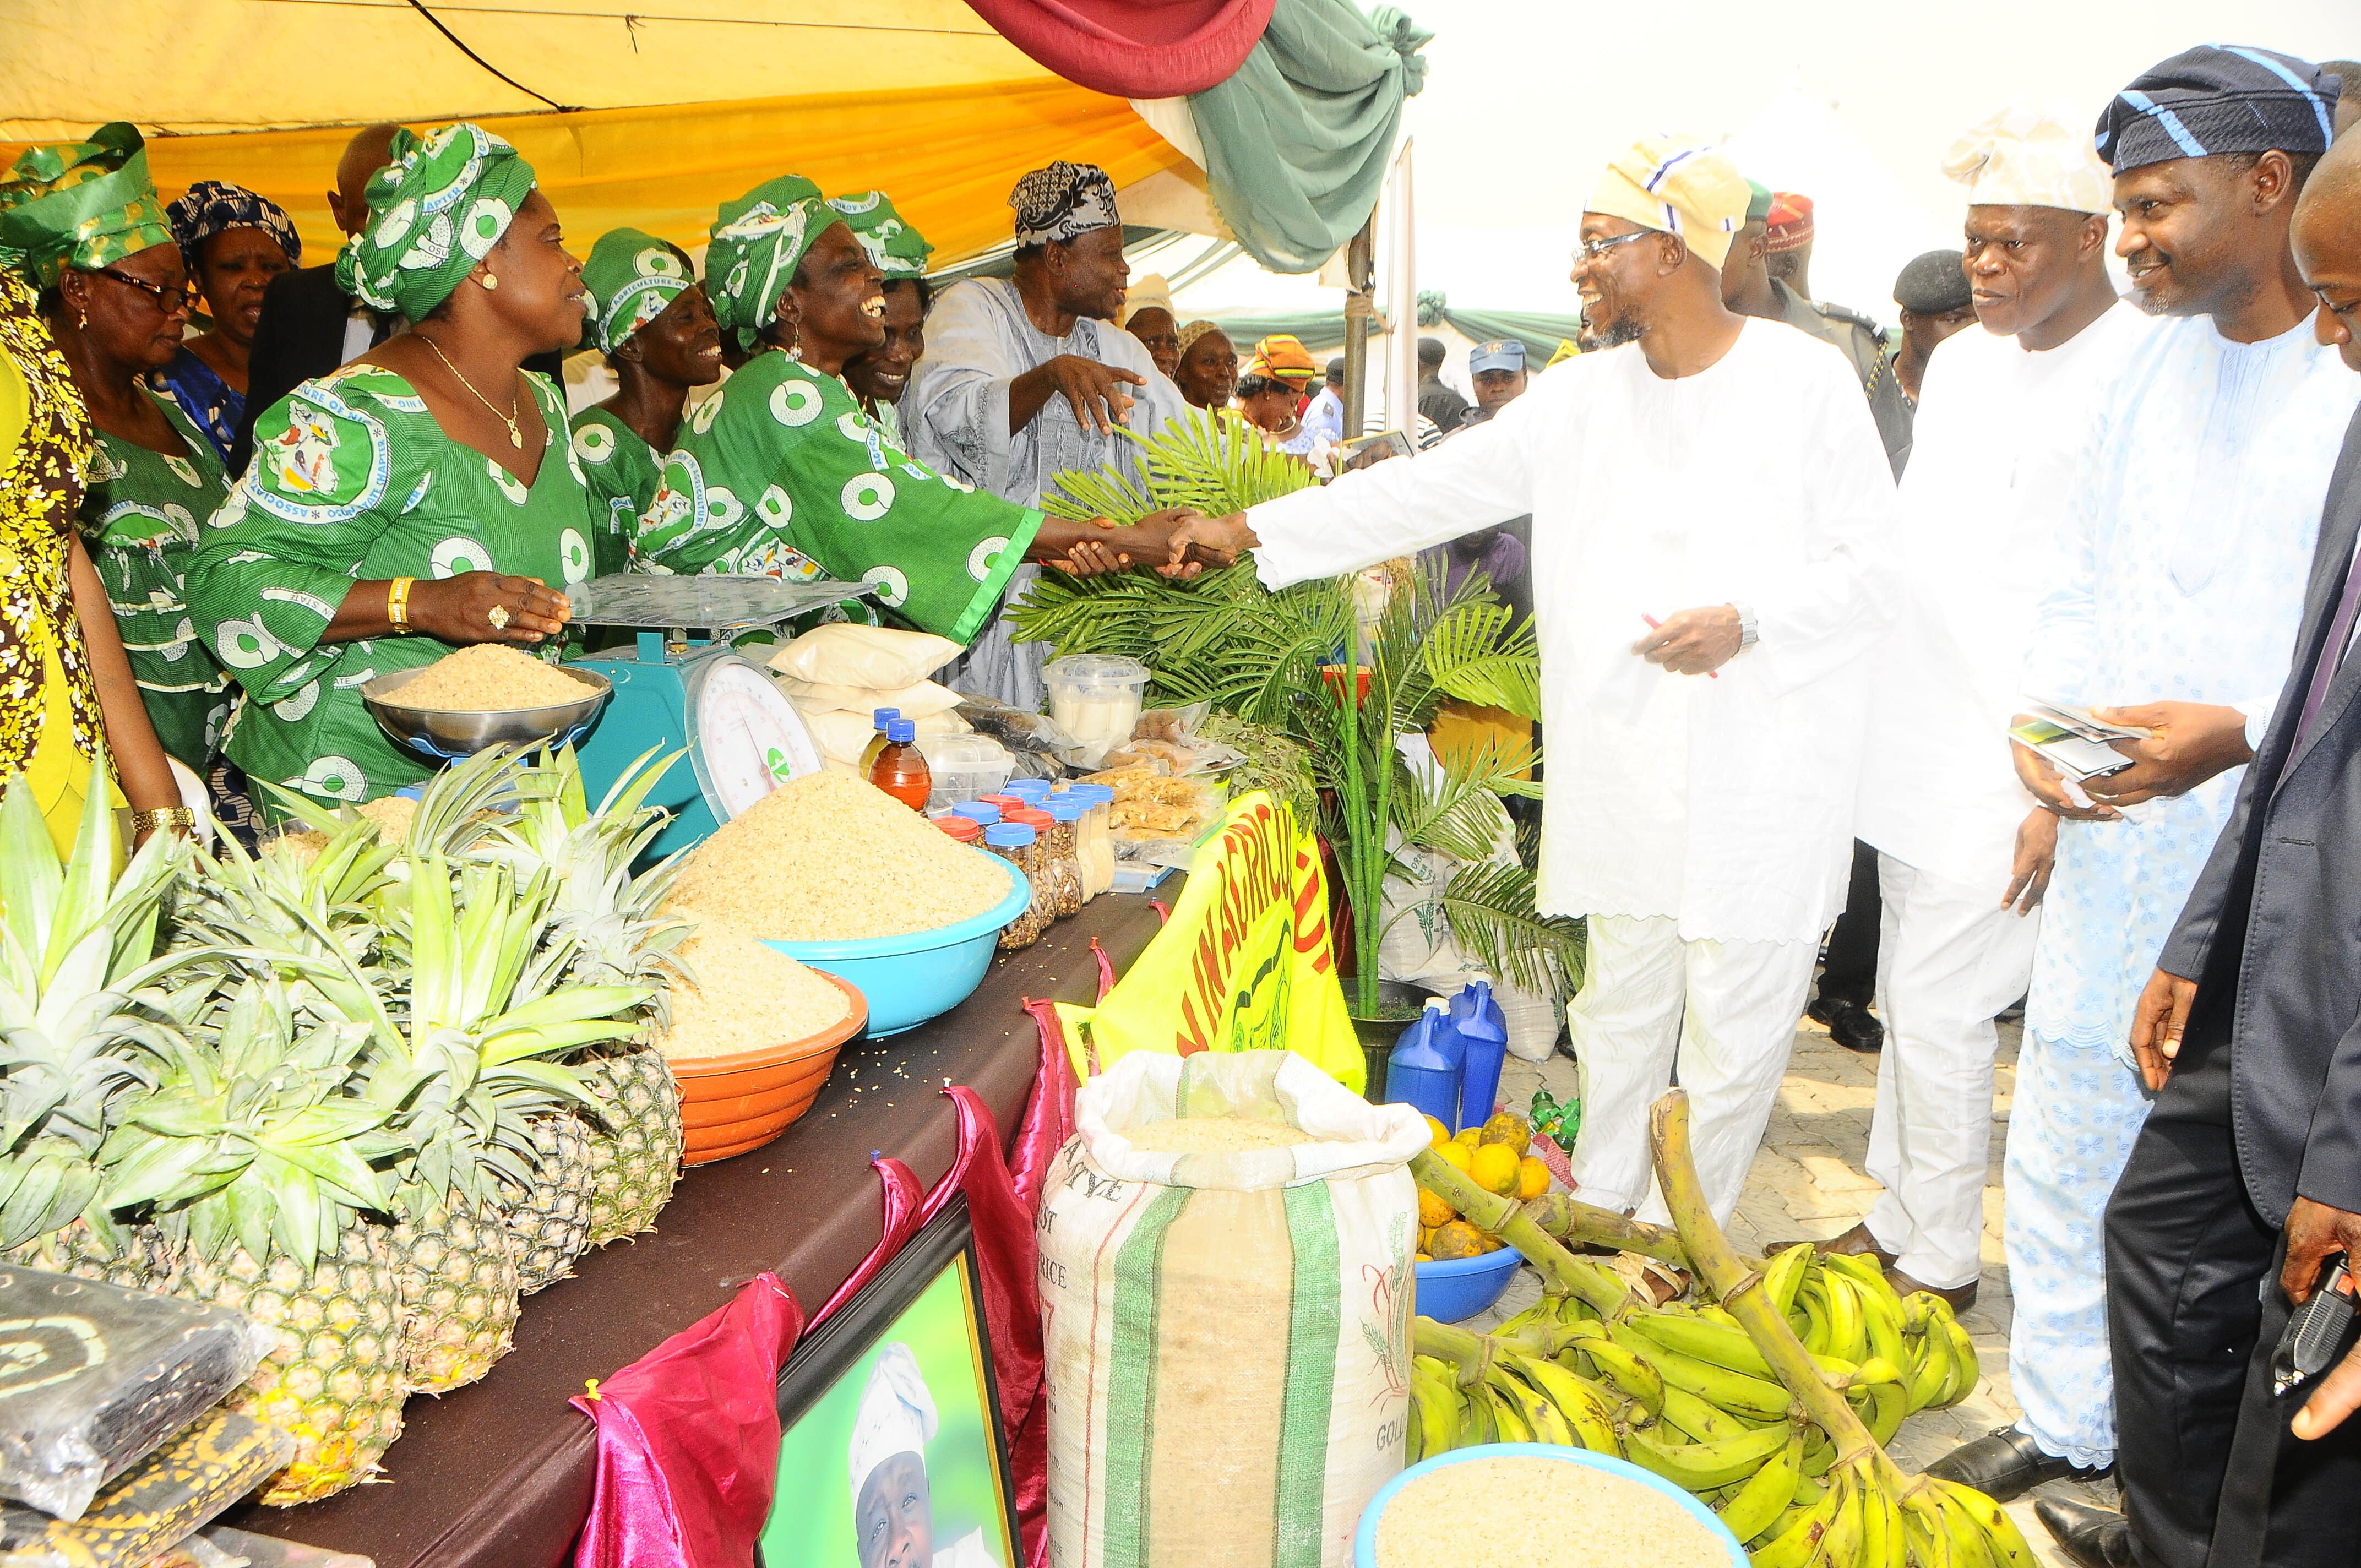 The Novelty Of “Policy For The People” In Osun State